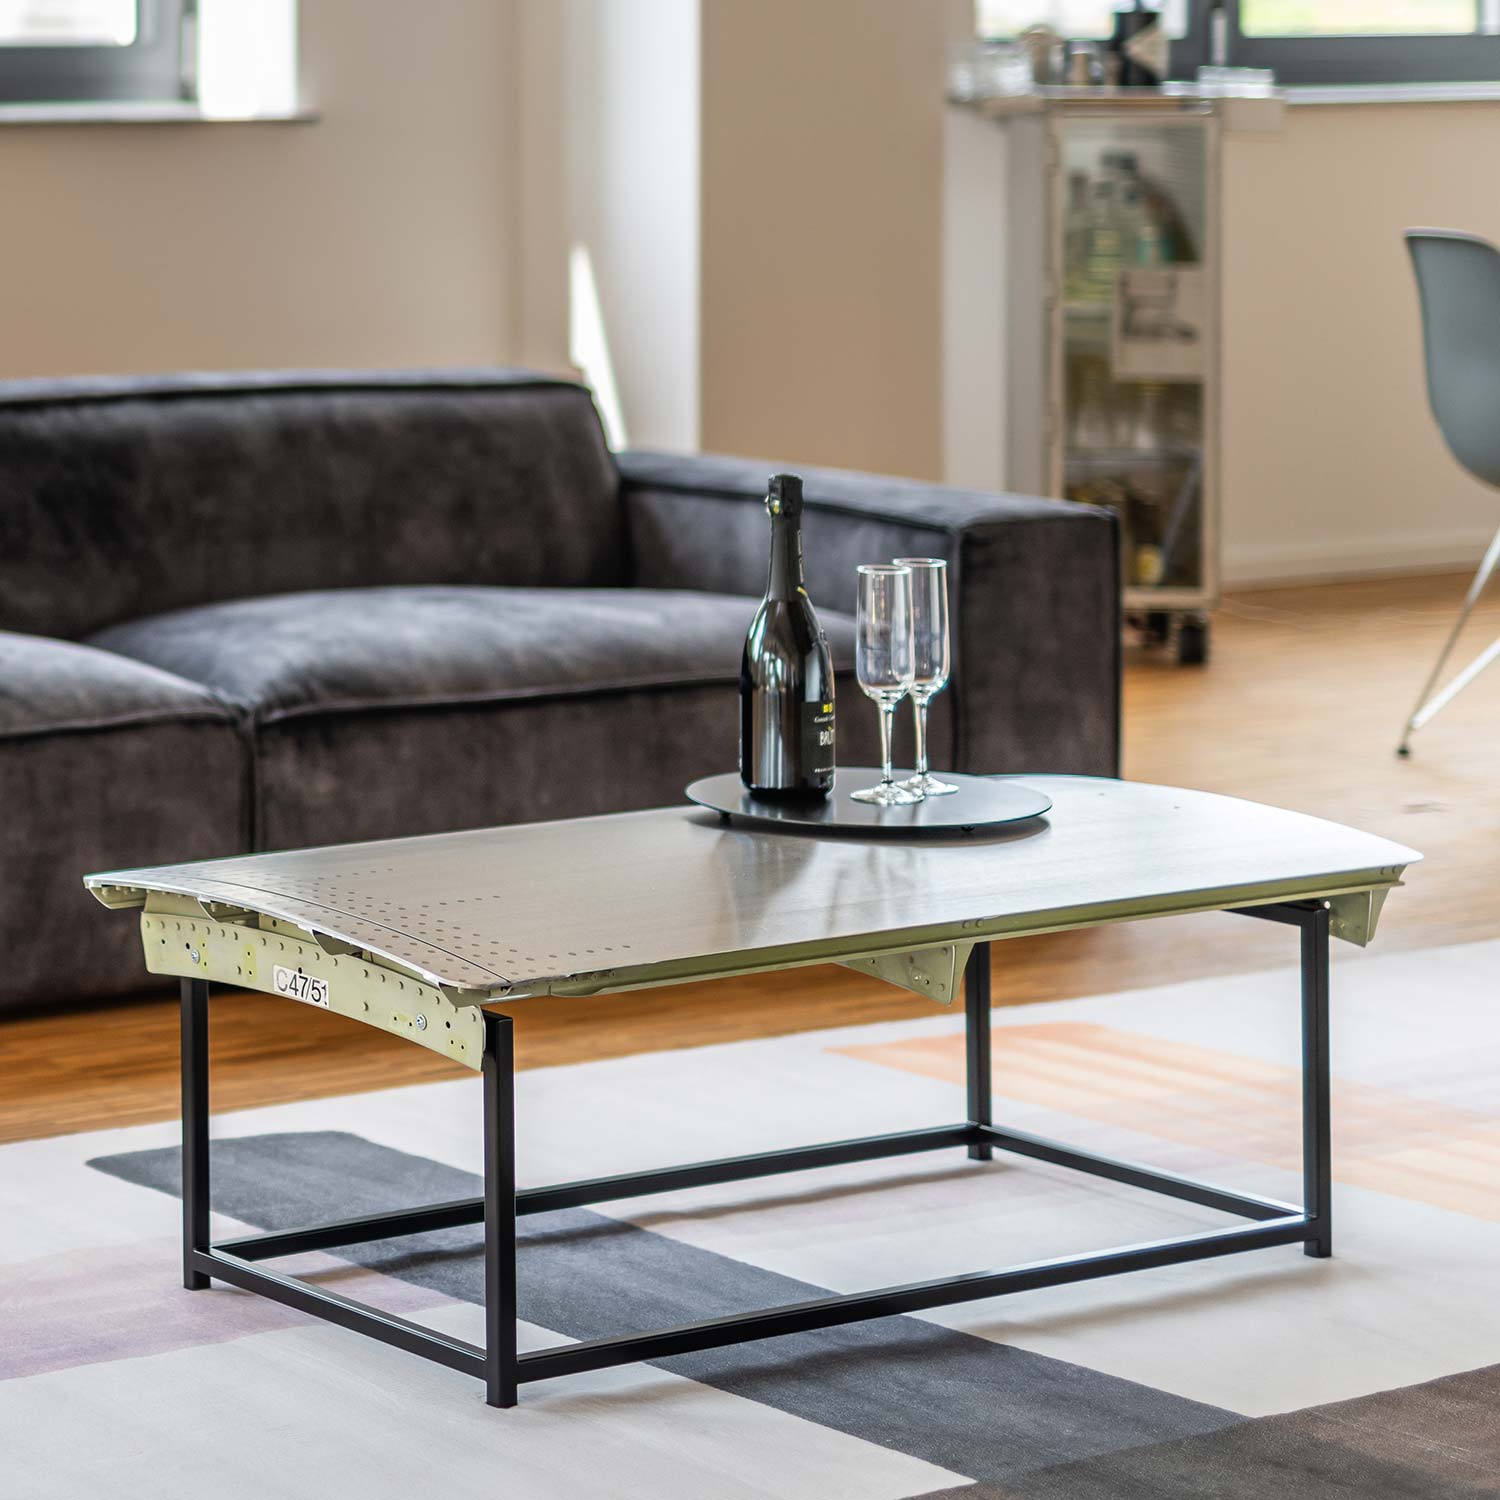 Coffee Table from Aircraft Parts, Brushed Aluminum, Frame: Black, approx. 116 x 59 cm